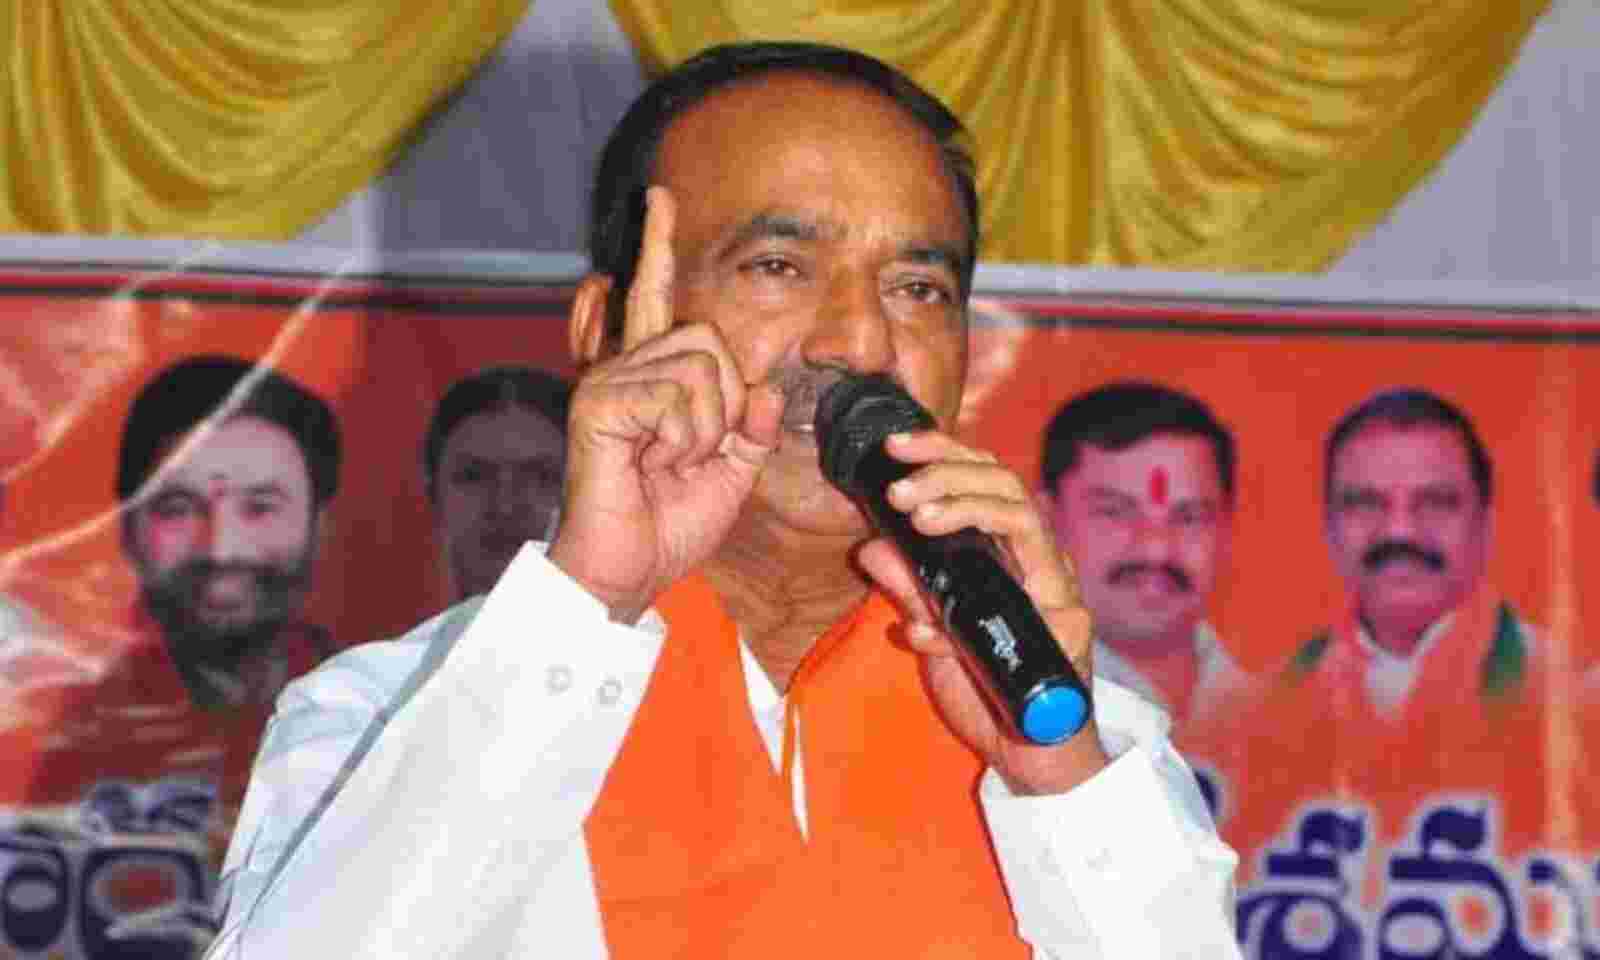 People vexed with TRS government: Eatala Rajender